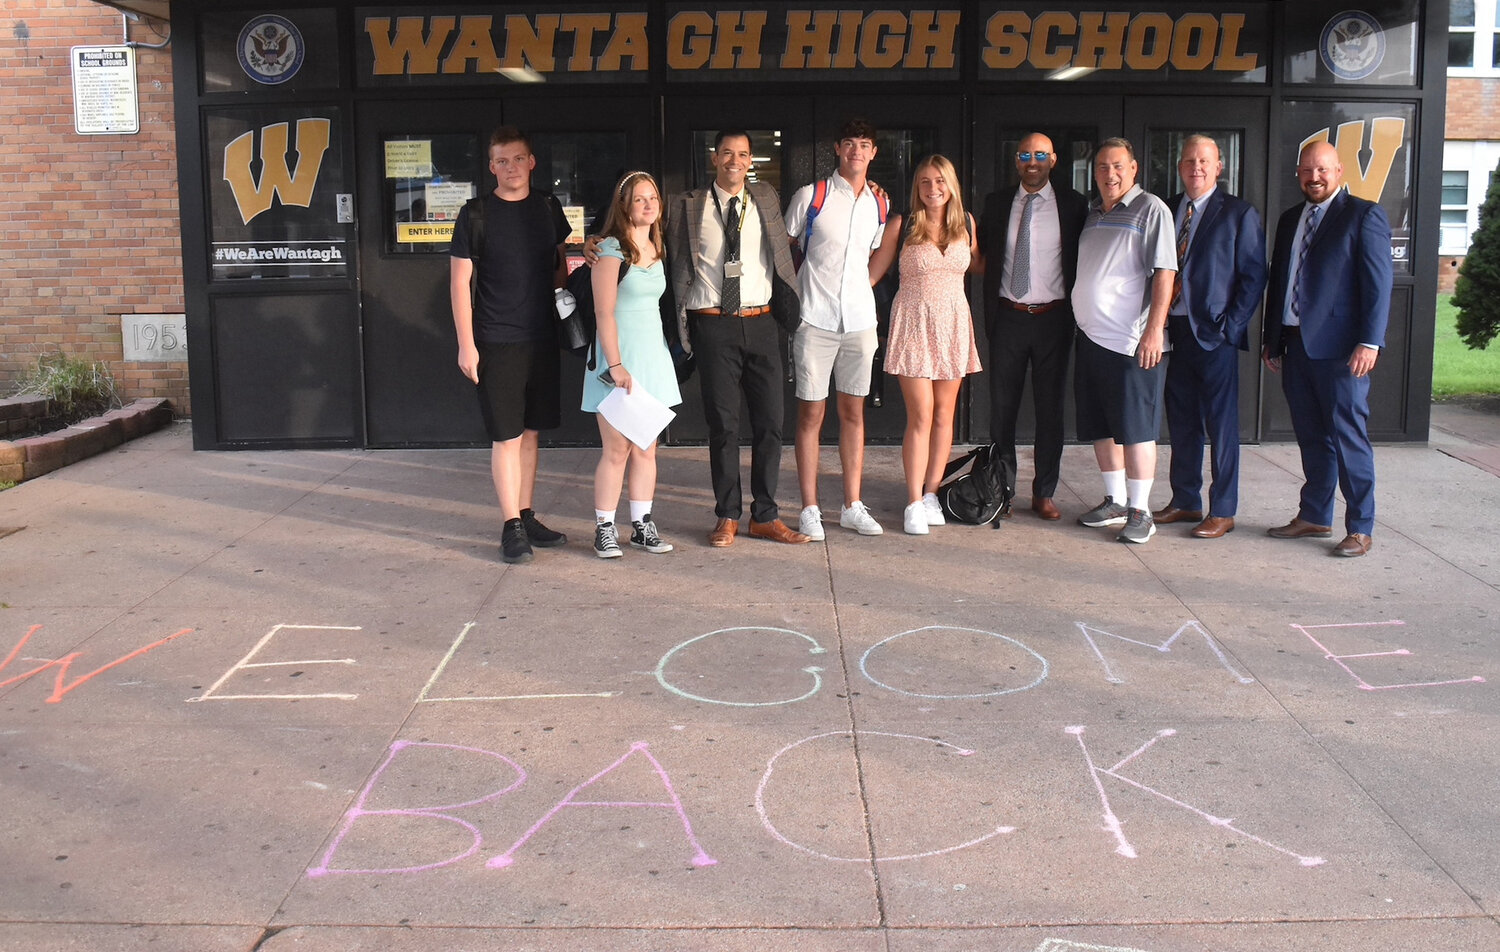 A welcome back chalk message greeted students as they arrived for the first day of school at Wantagh High School on Sept. 5.